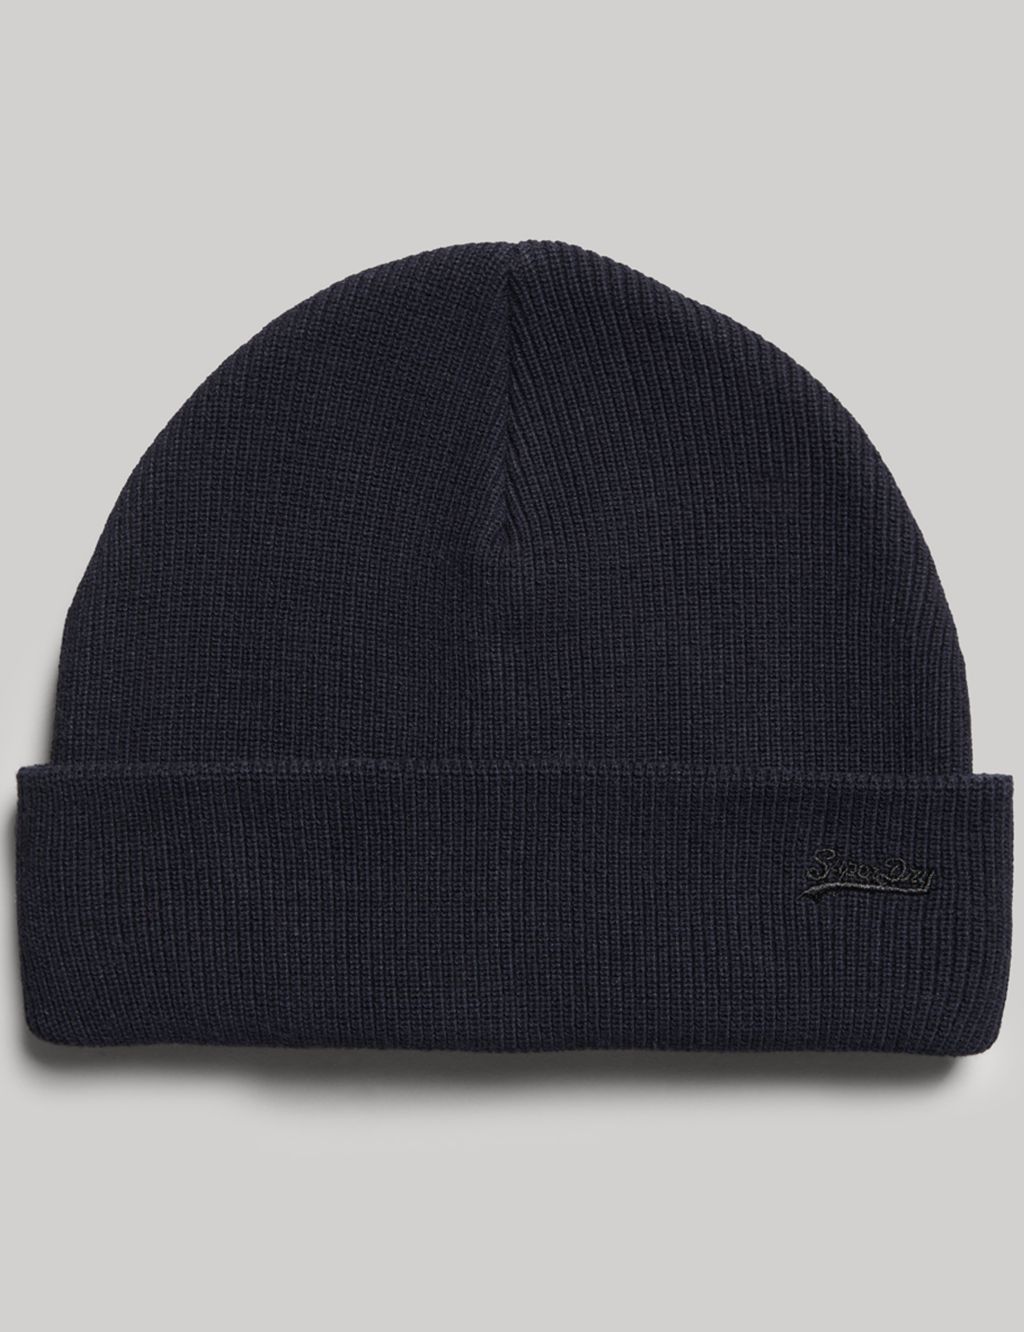 Pure Cotton Knitted Beanie Hat image 2